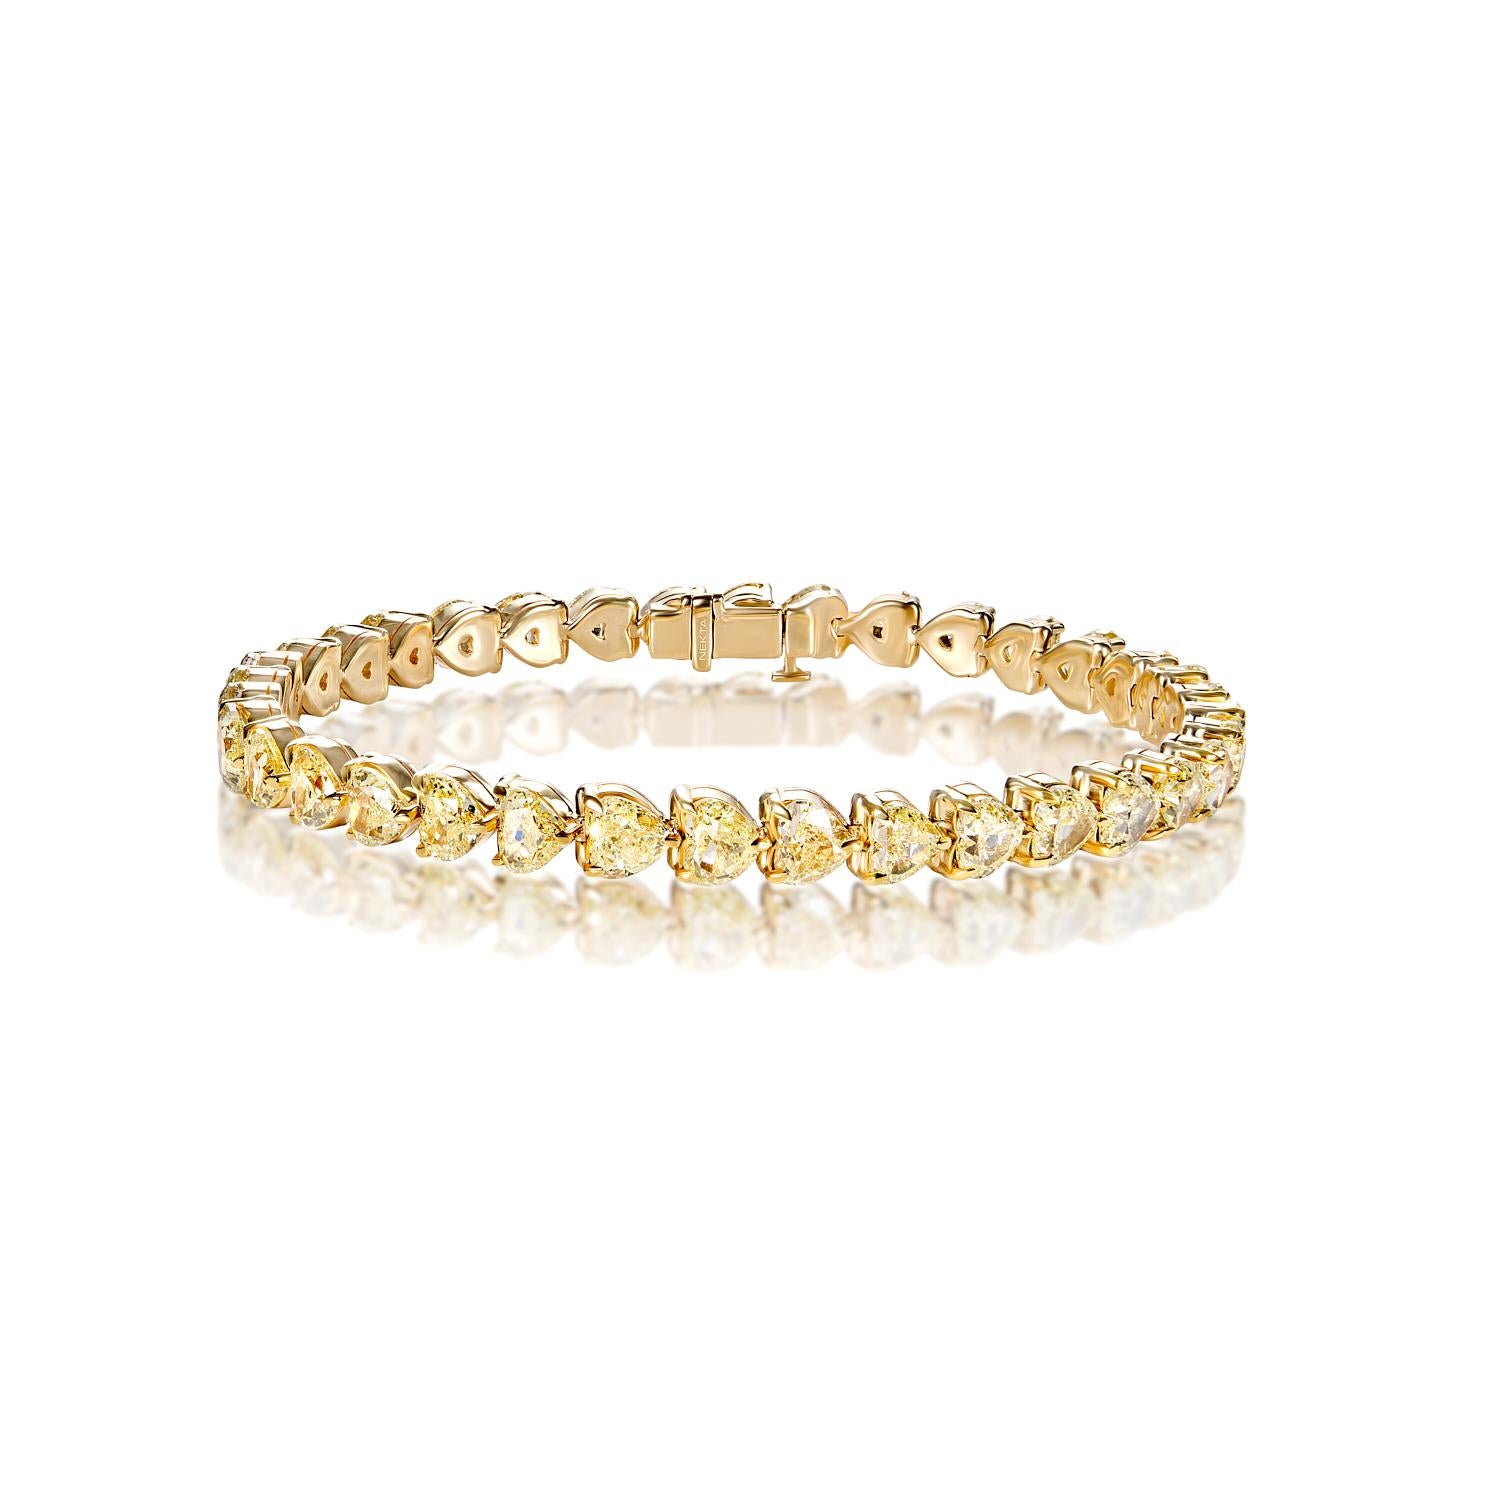 The HOLLAND 18 Carat Single Row Diamond Tennis Bracelet features COMBINE MIX SHAPE DIAMONDS brilliants weighing a total of approximately 18 carats, set in 18K Yellow Gold.

Style:
Diamonds
Diamond Size: 18.36 Carats
Color: Yellow
Diamond Shape: